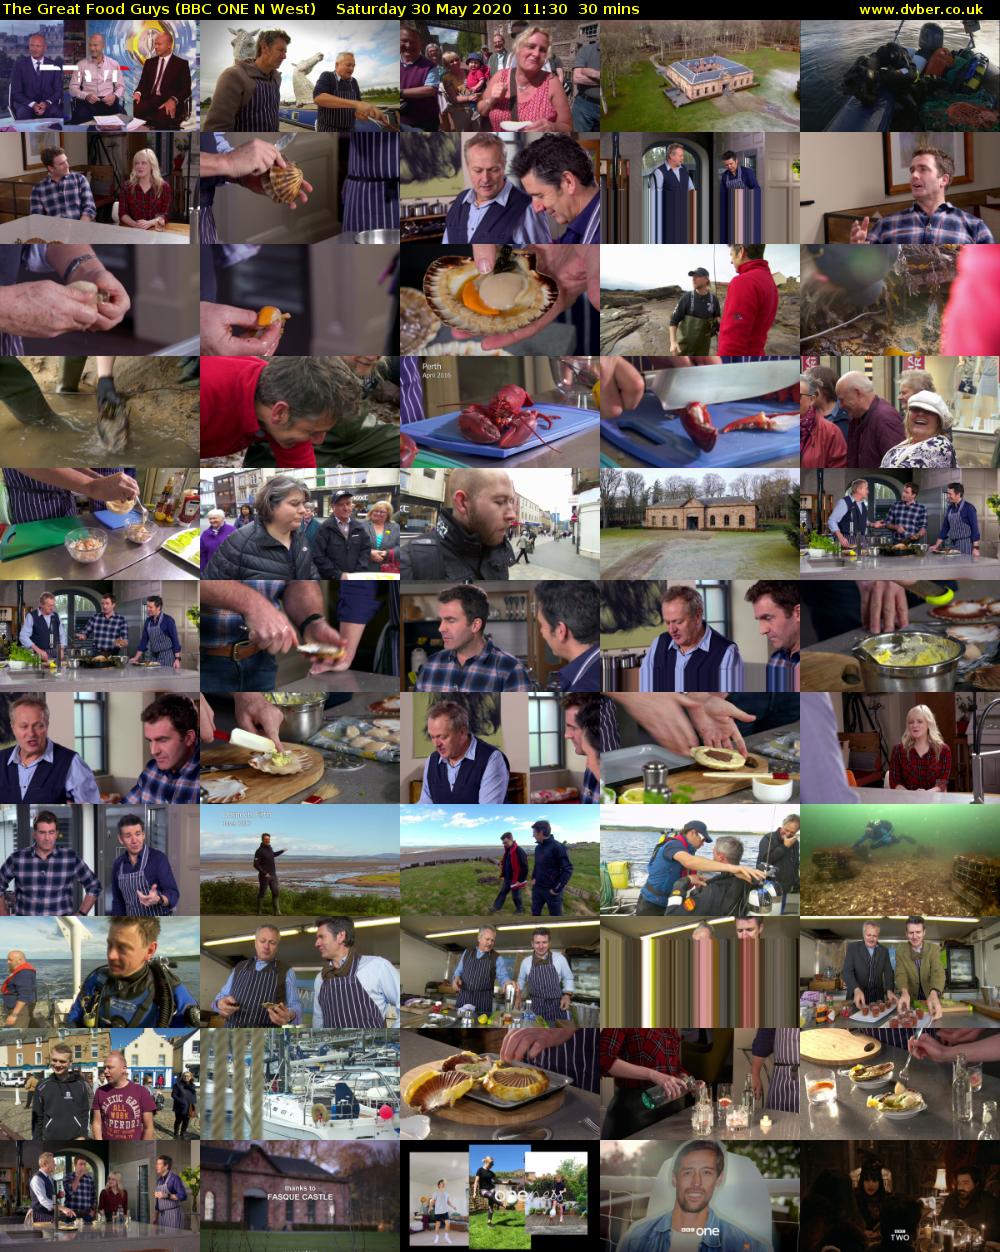 The Great Food Guys (BBC ONE N West) Saturday 30 May 2020 11:30 - 12:00